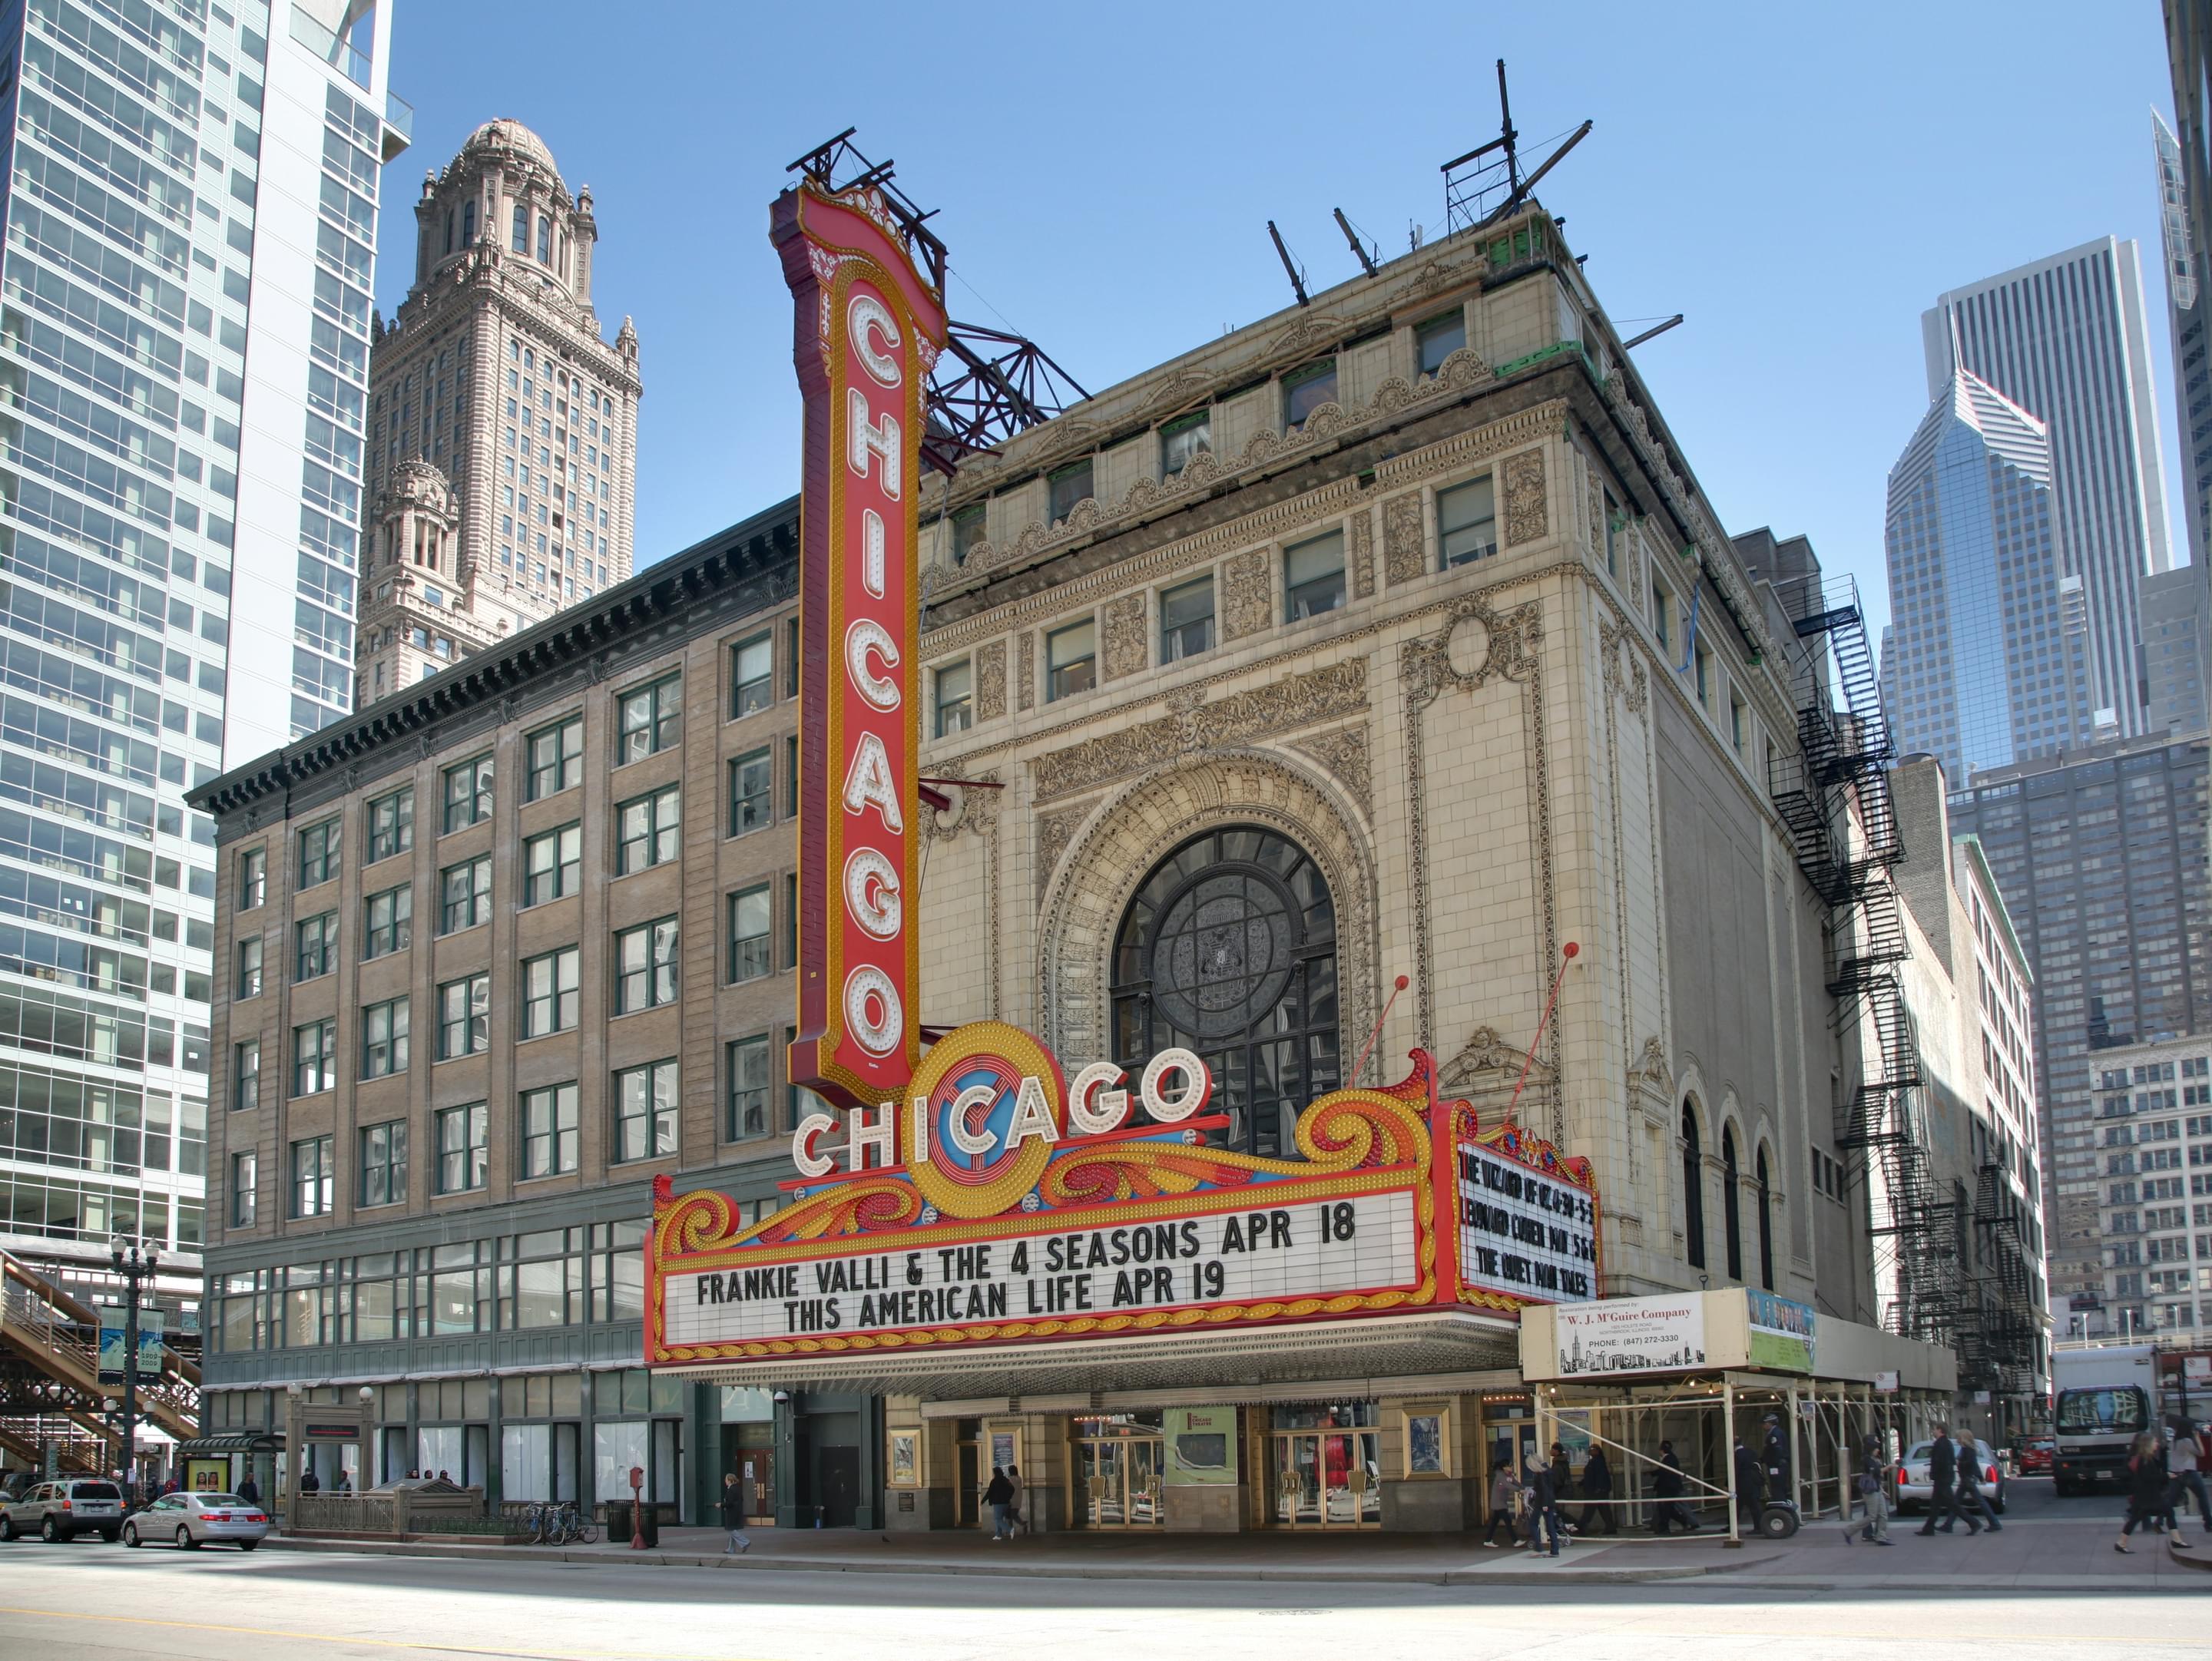 The Chicago Theatre Overview